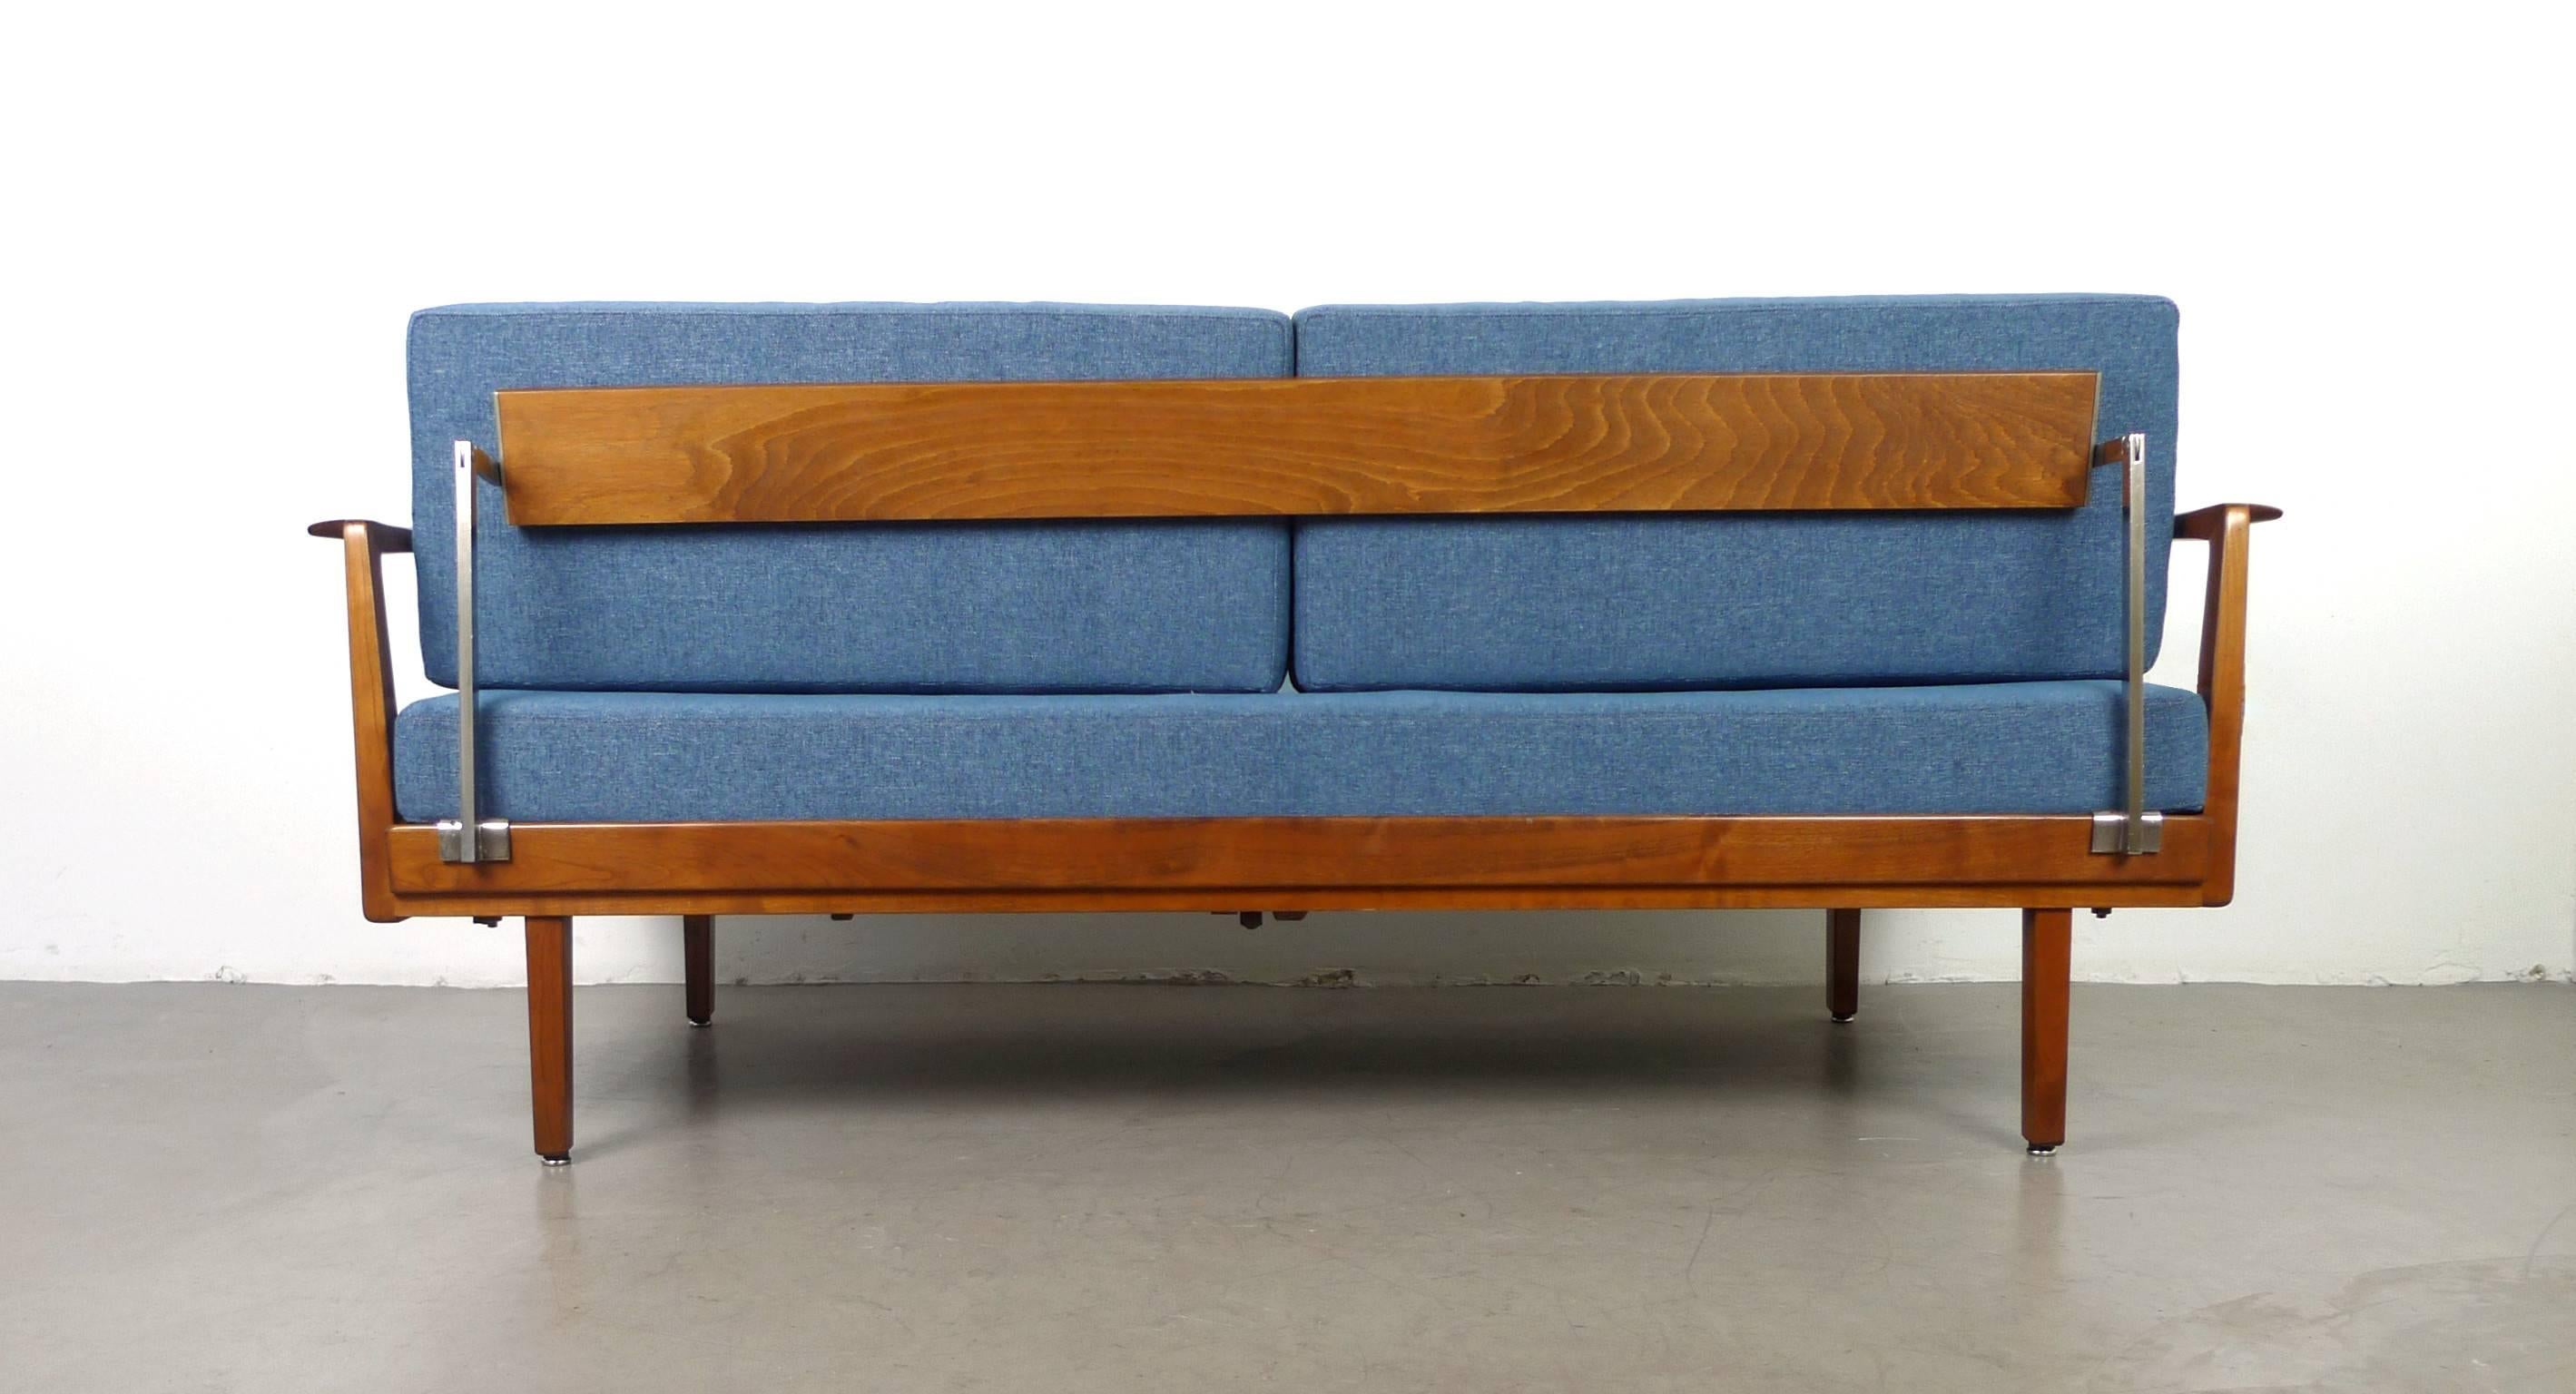 Mid-Century Modern Walter Knoll Sofa Bed with Walnut Frame from the 1950s, Germany